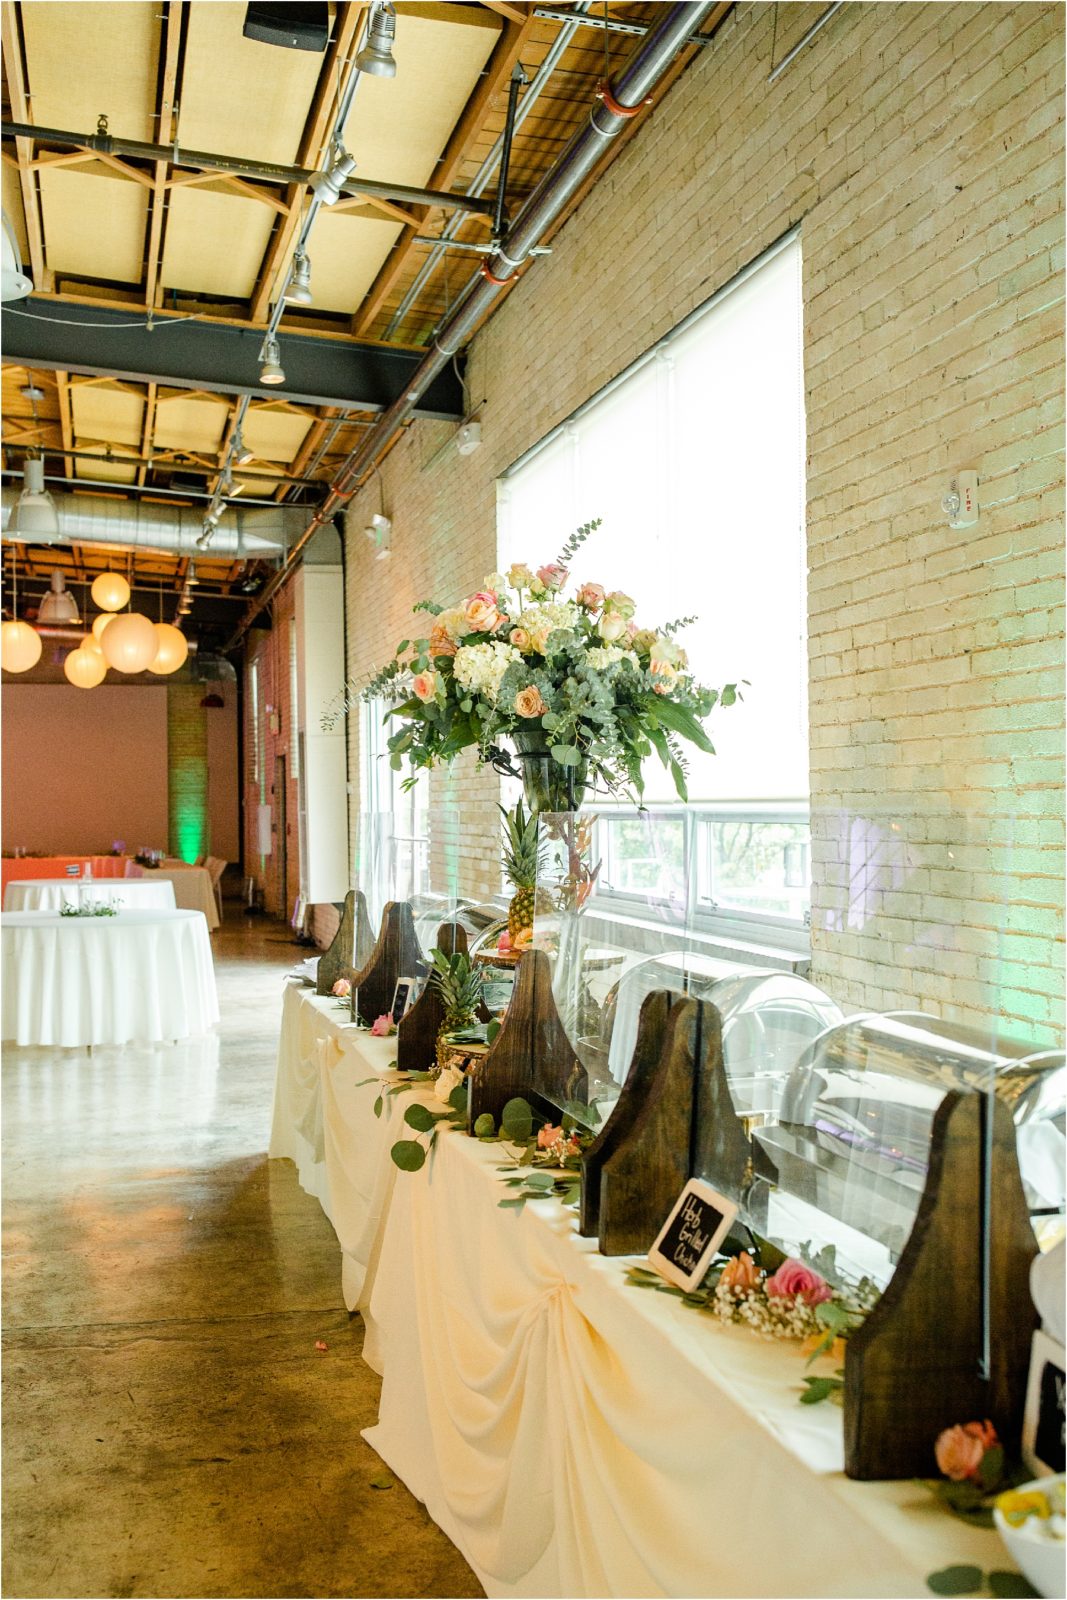 Zen Event venue decorated for a wedding